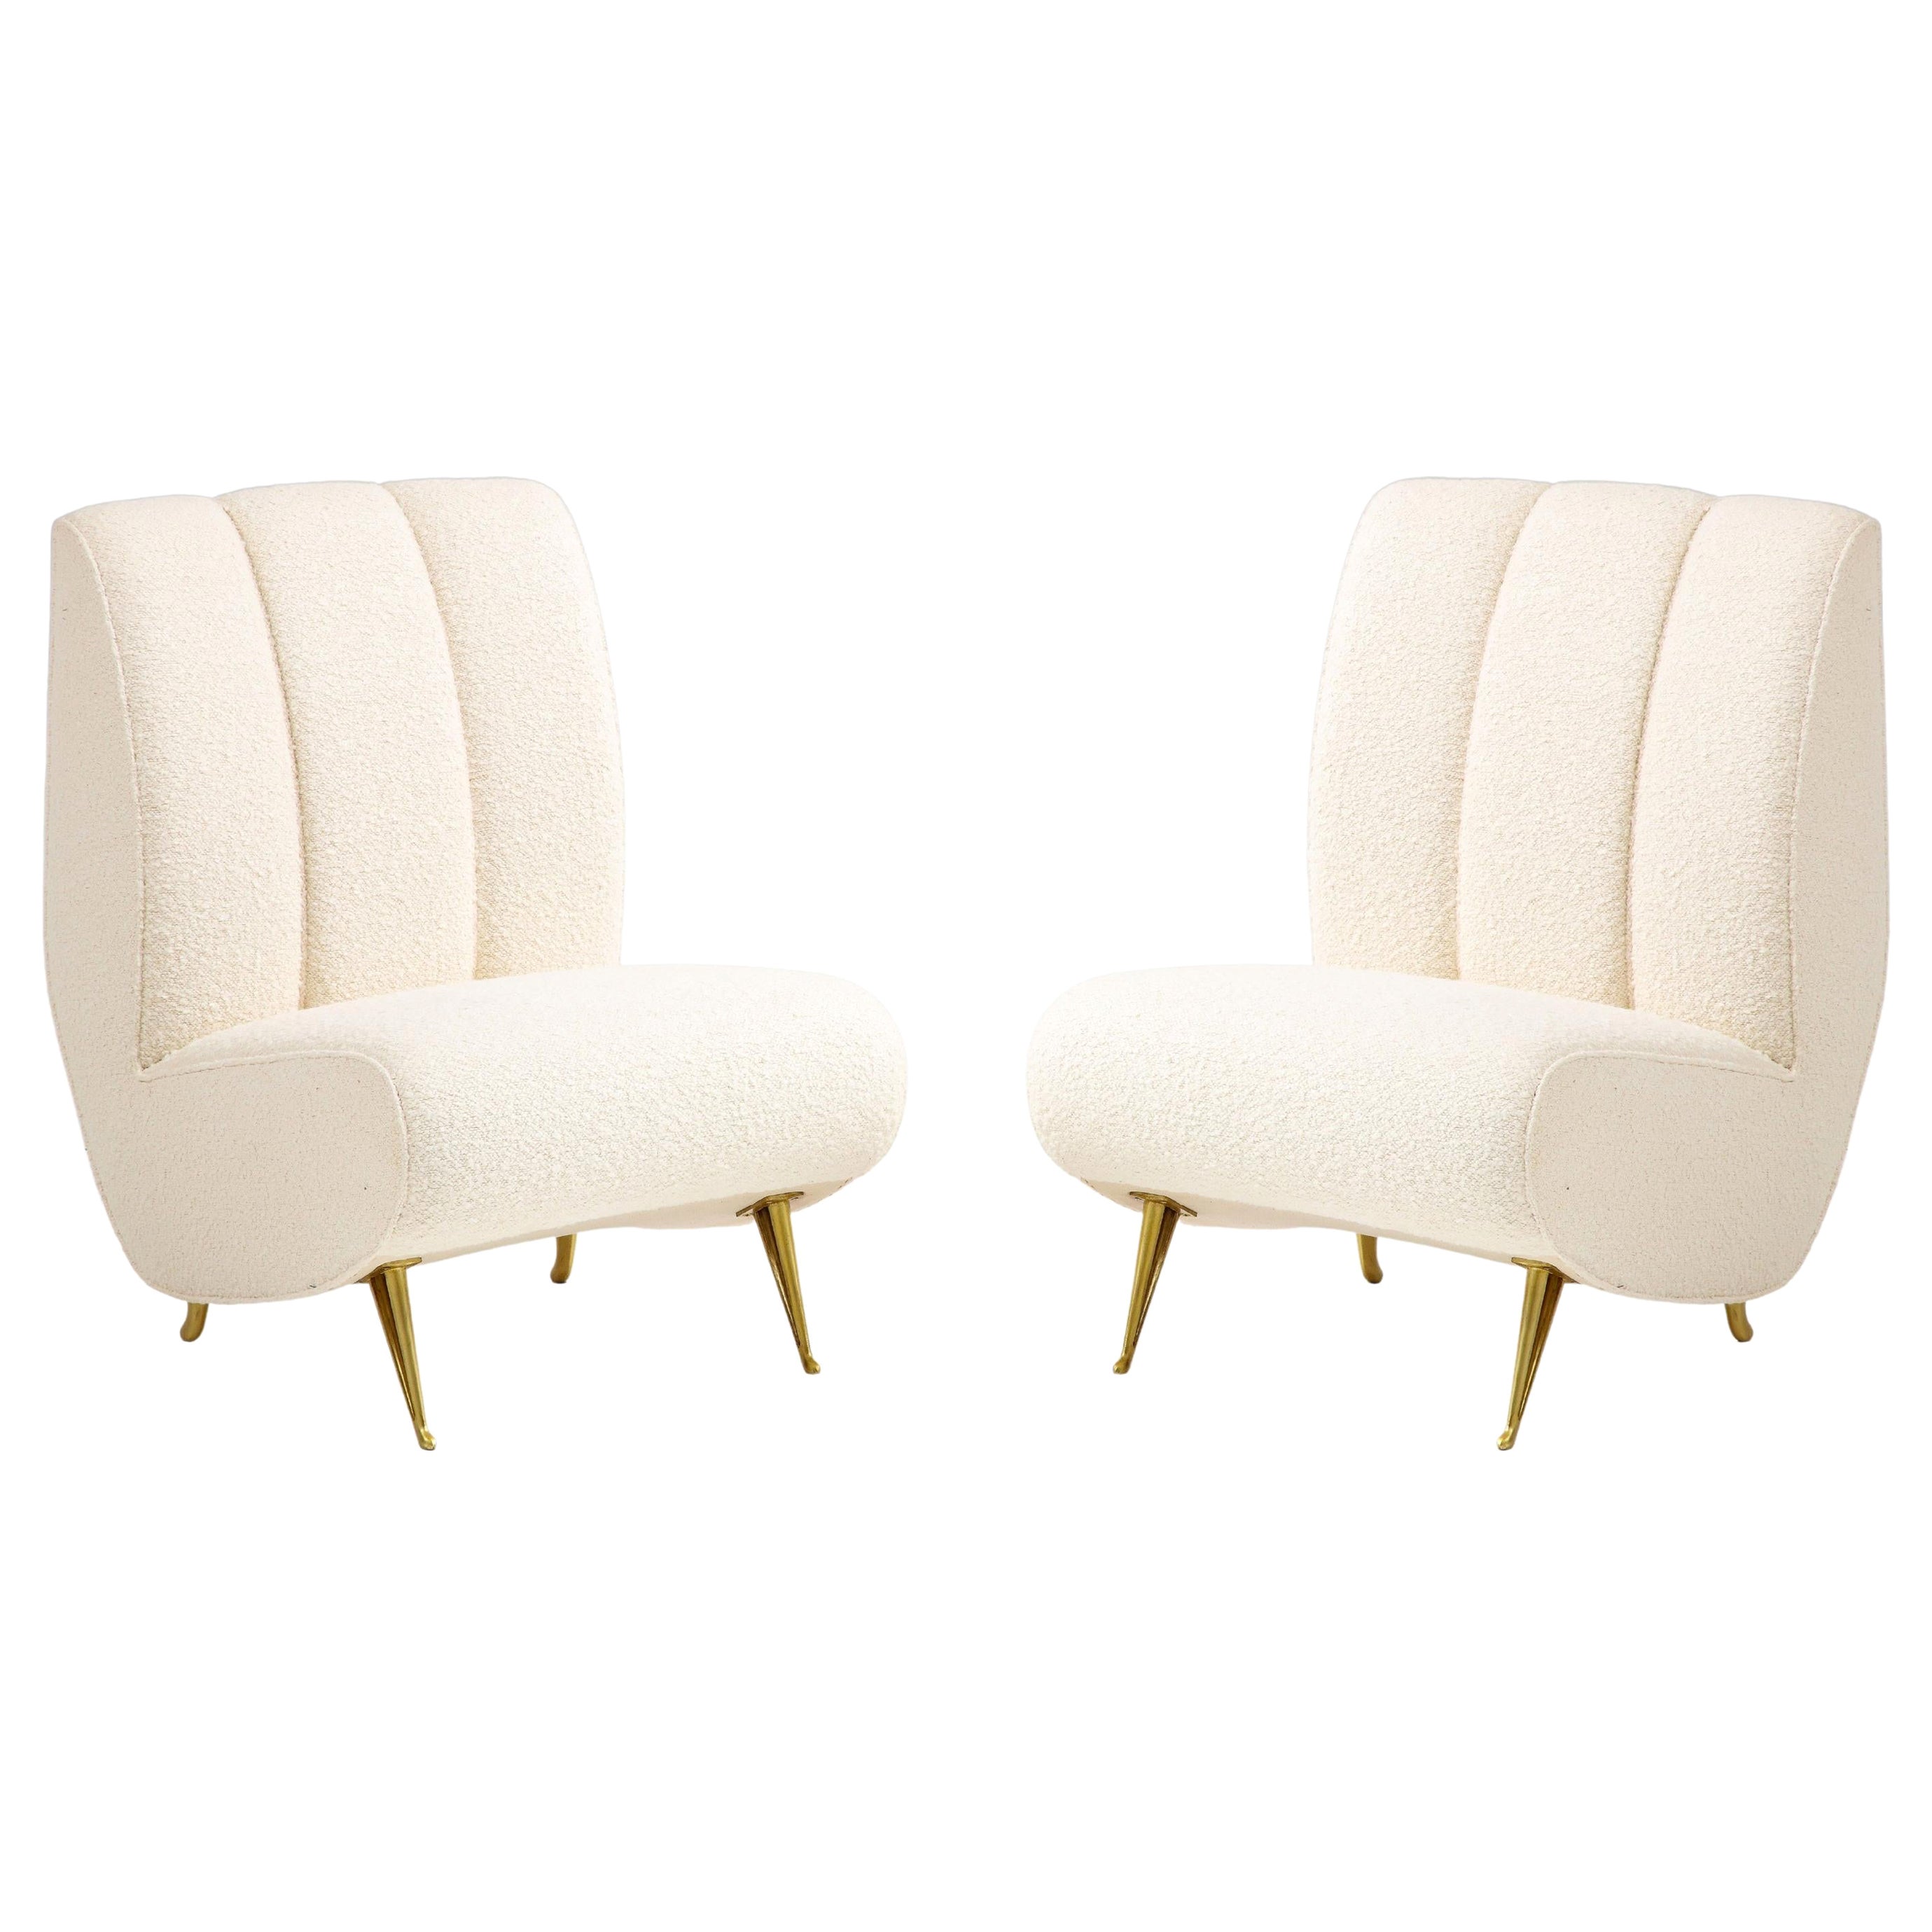 ISA Bergamo Rare Pair of Lounge or Slipper Chairs in Ivory Bouclé, Italy, 1950s